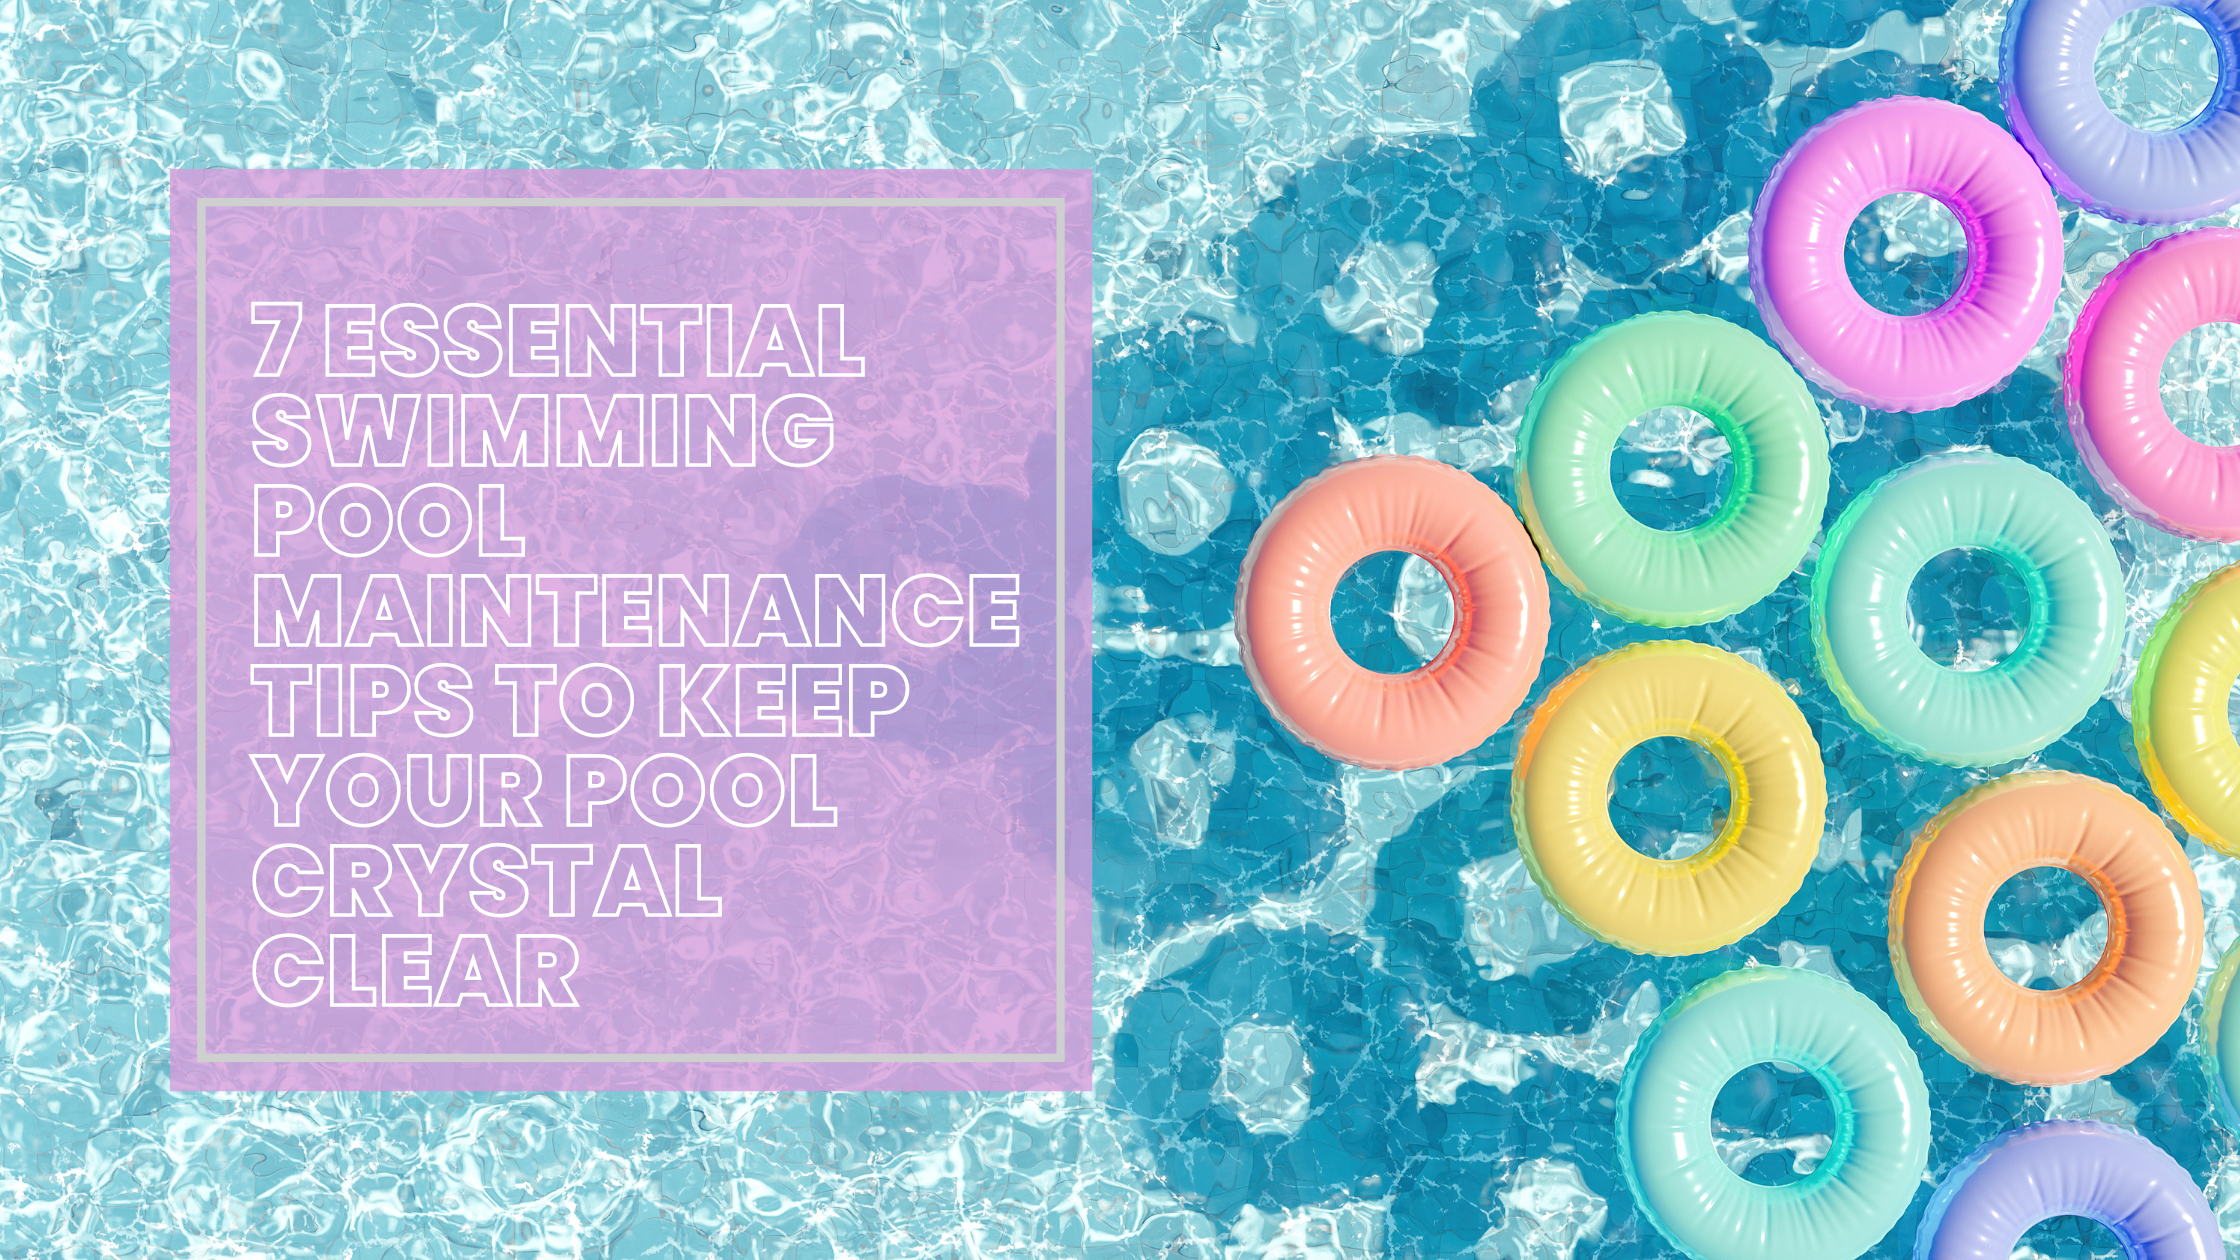 7 Essential Swimming Pool Maintenance Tips to Keep Your Pool Crystal Clear